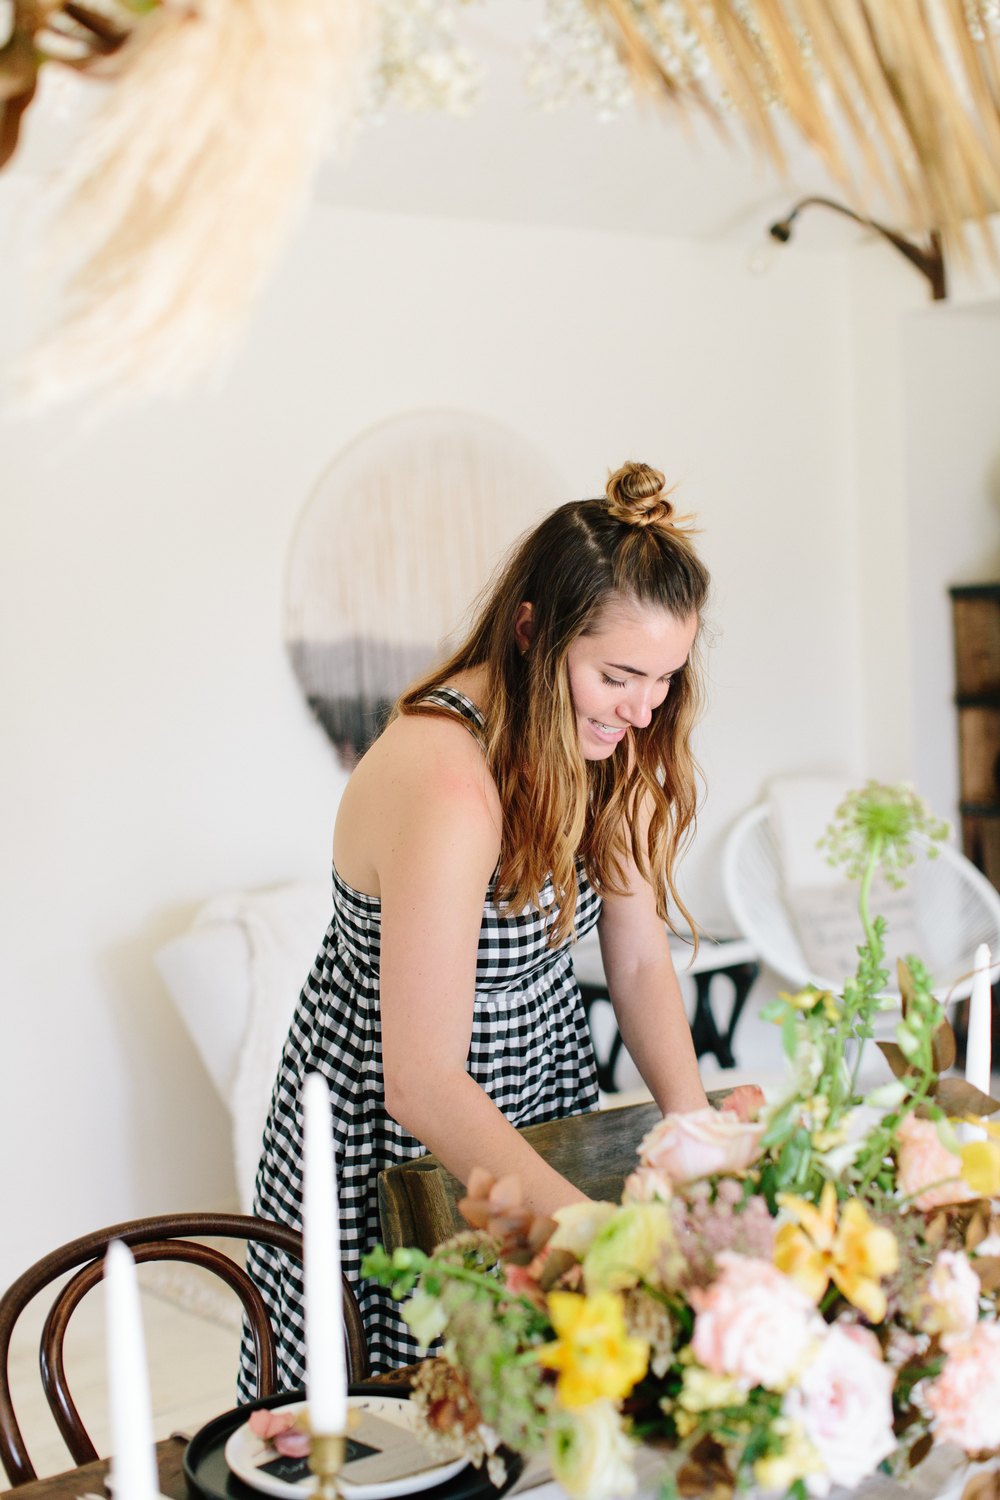 Vintage Bohemian Dinner Party for Antique Week in Texas ⋆ Ruffled